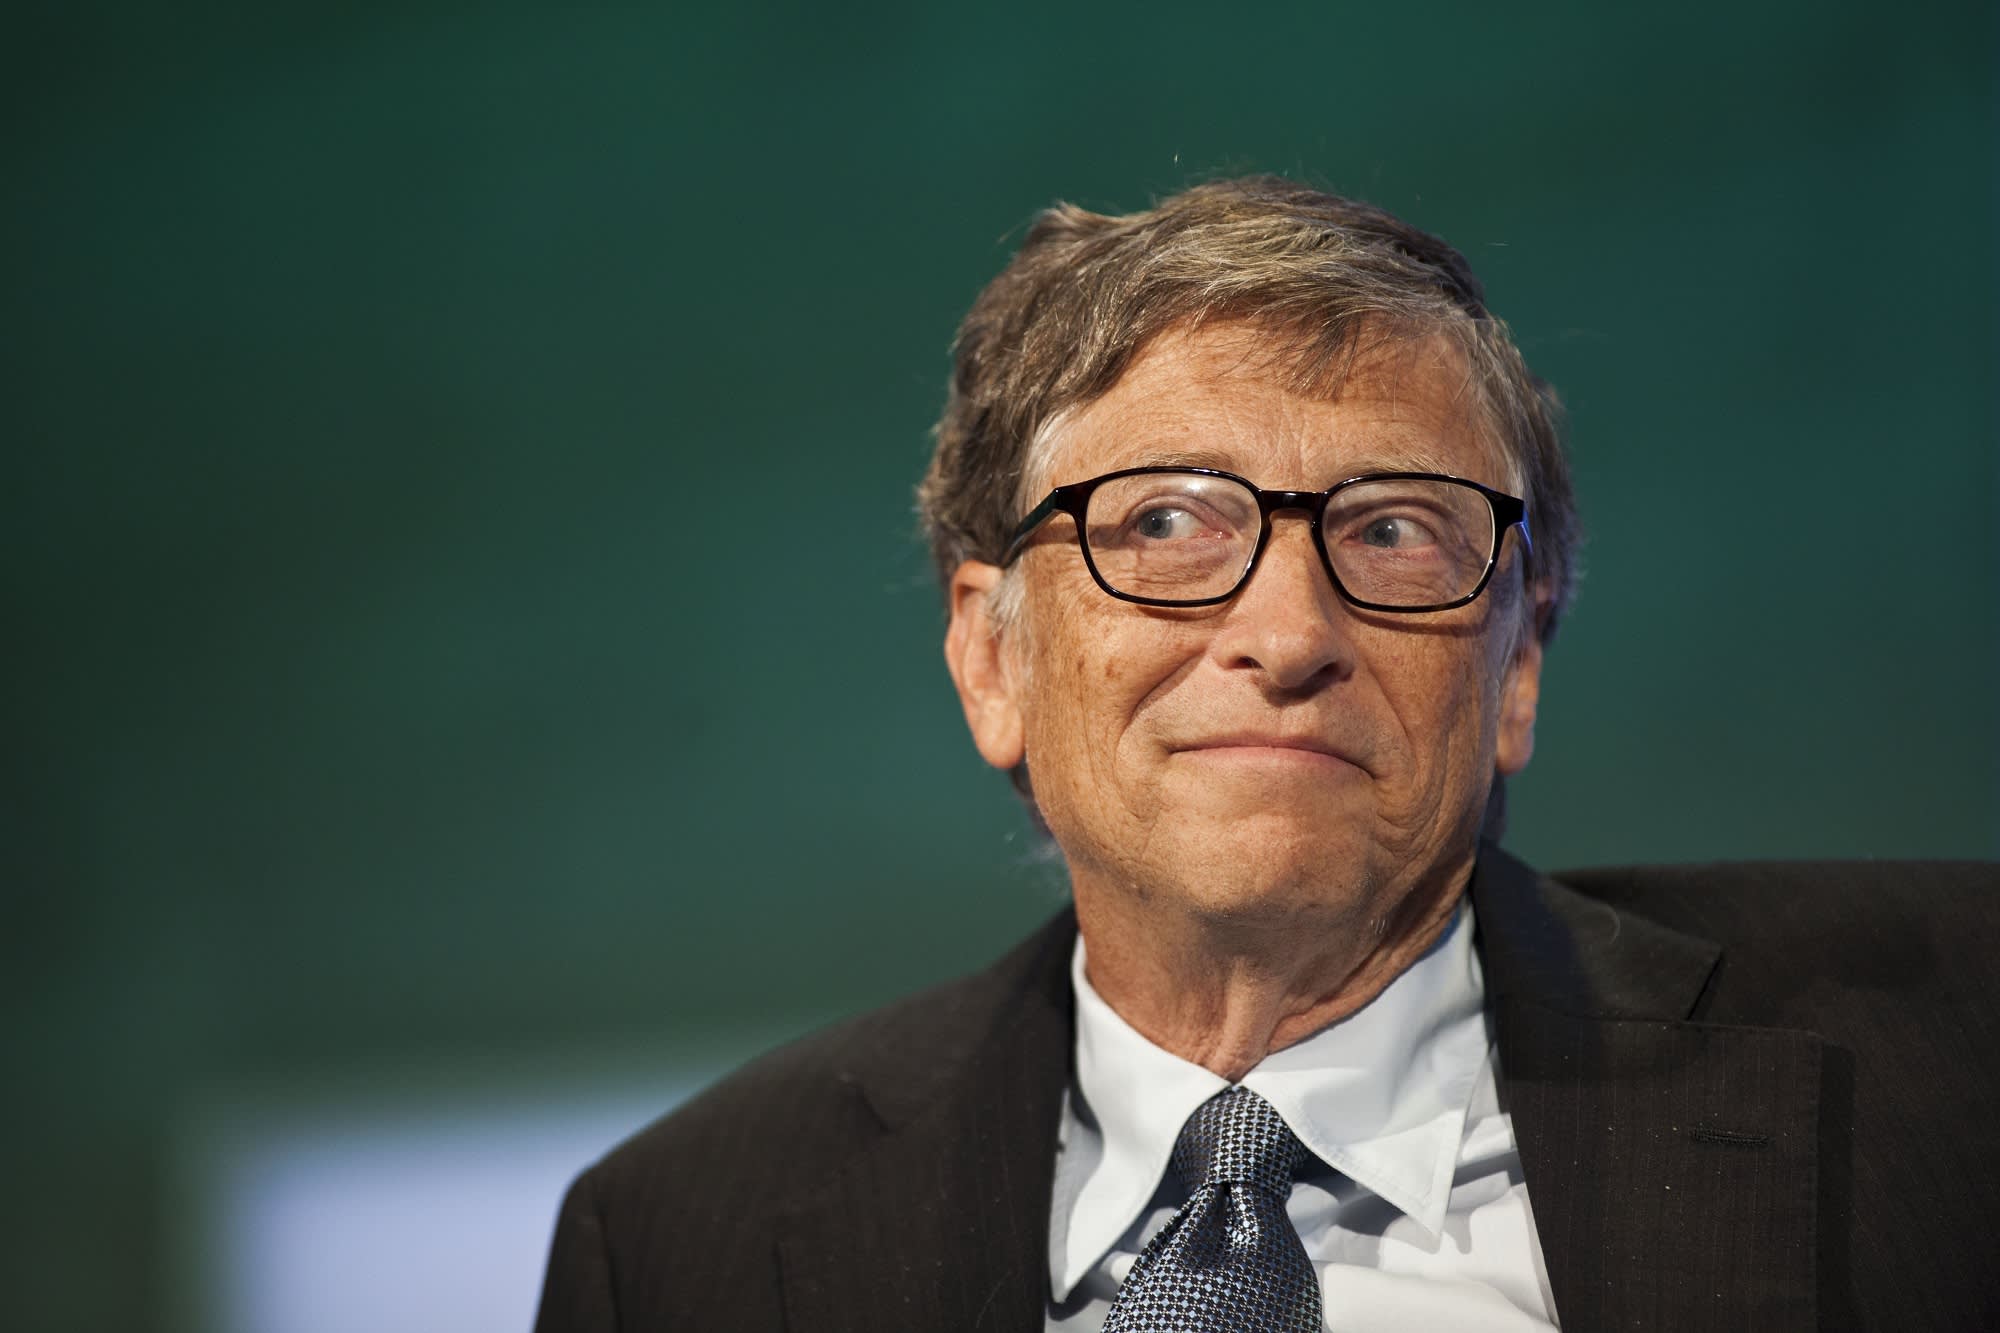 Bill Gates disagrees with Elon Musk: We shouldn't panic about A.I.